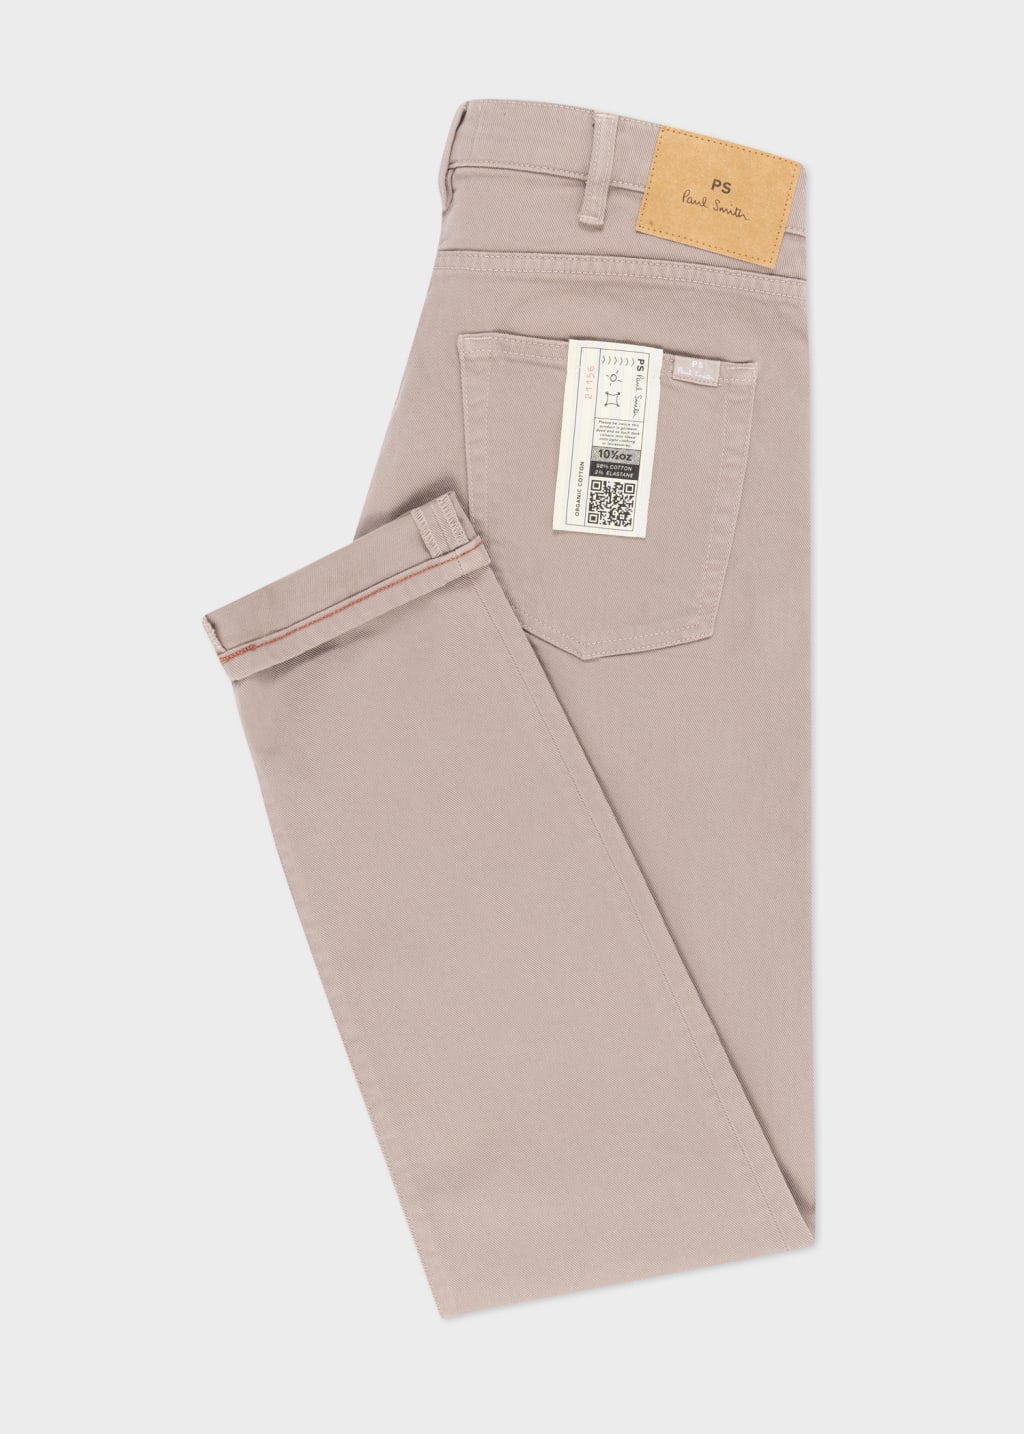 Detail View - Tapered-Fit Taupe Garment-Dyed Jeans Paul Smith